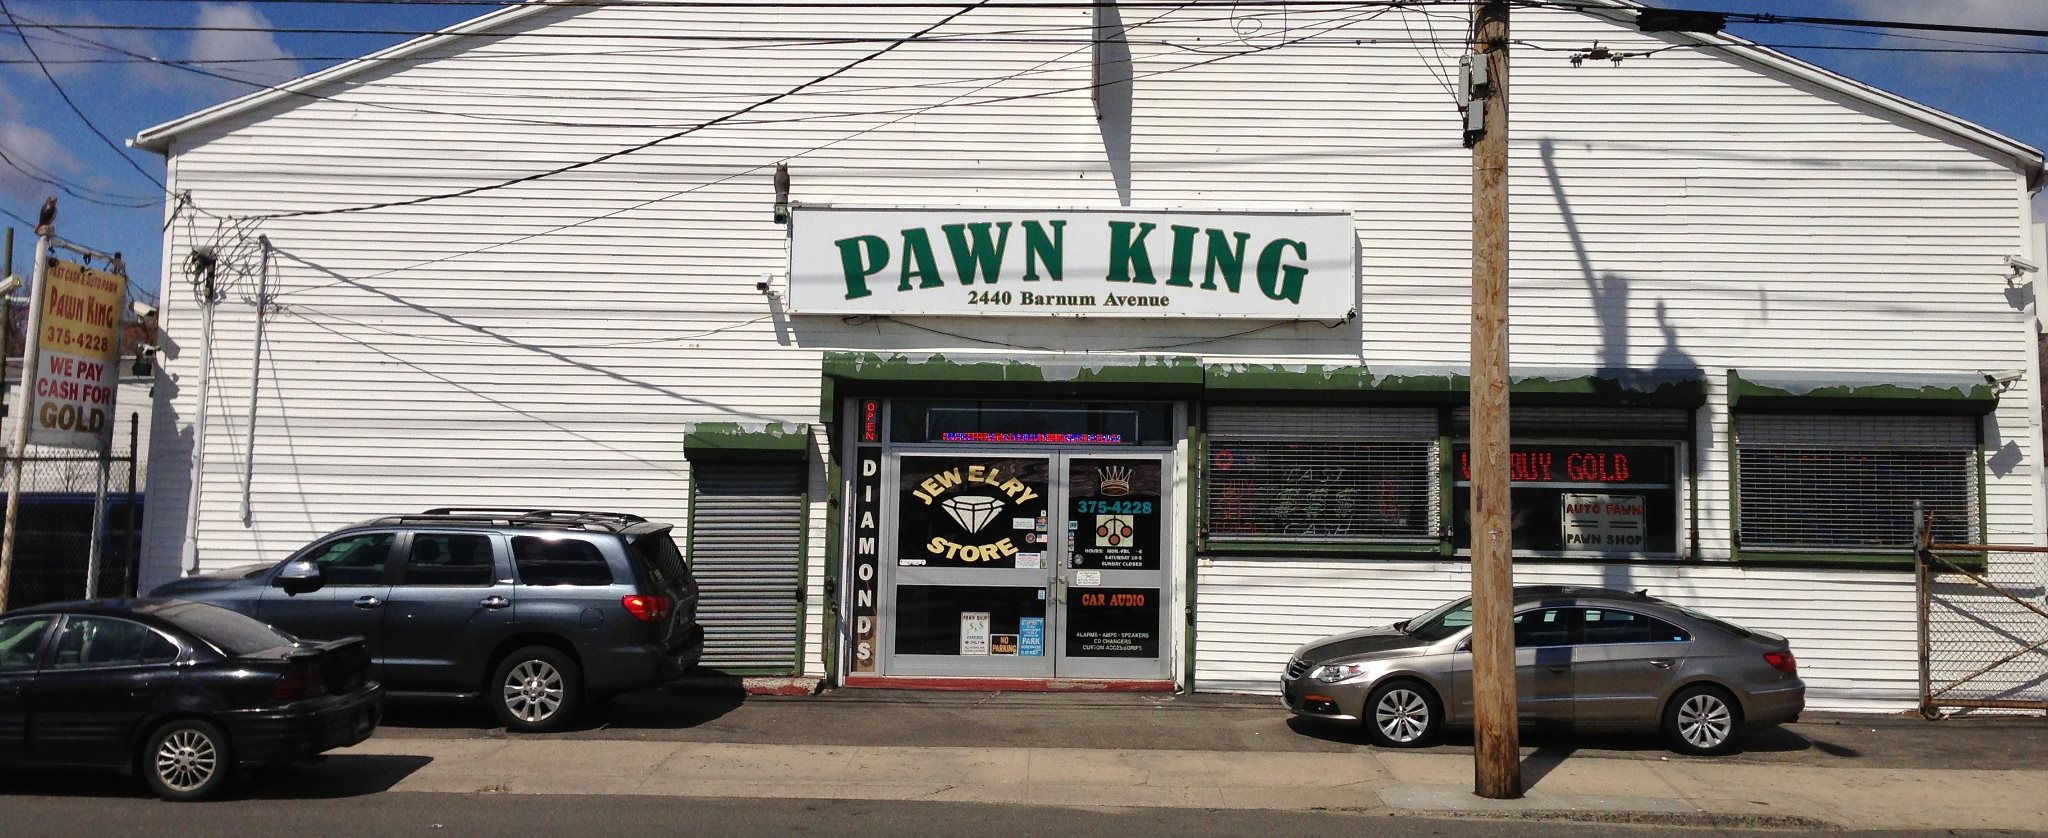 About Pawn King